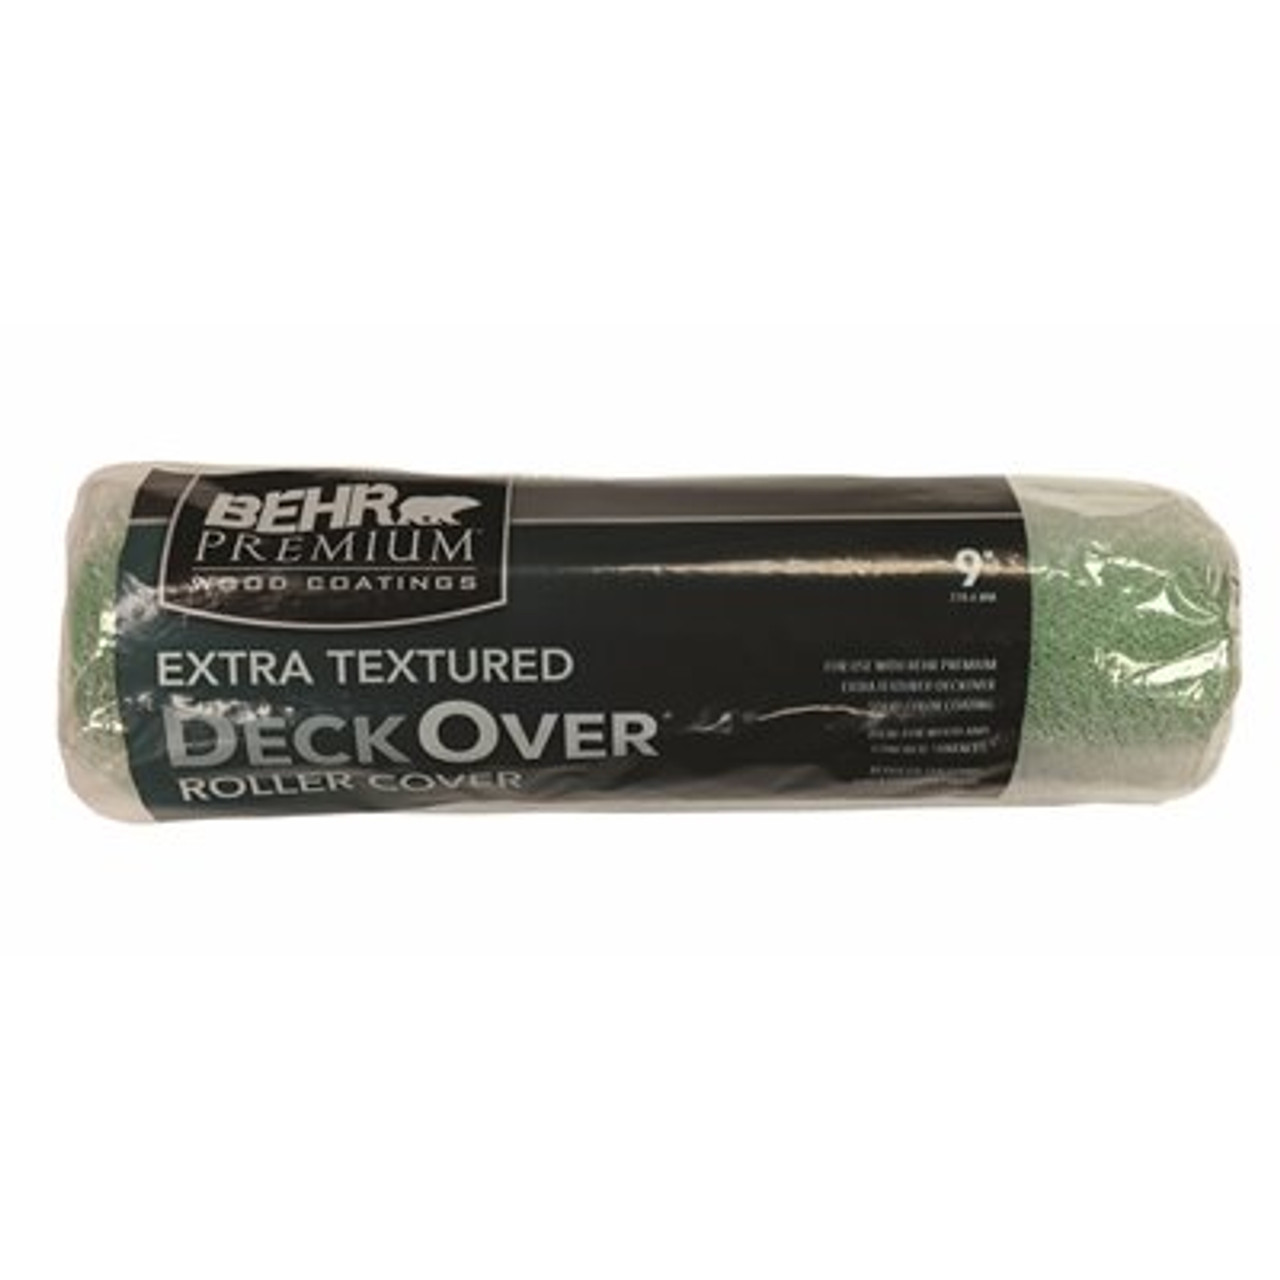 Behr 9 In. X 1/2 In. Nap Extra Textured Deckover Roller Cover